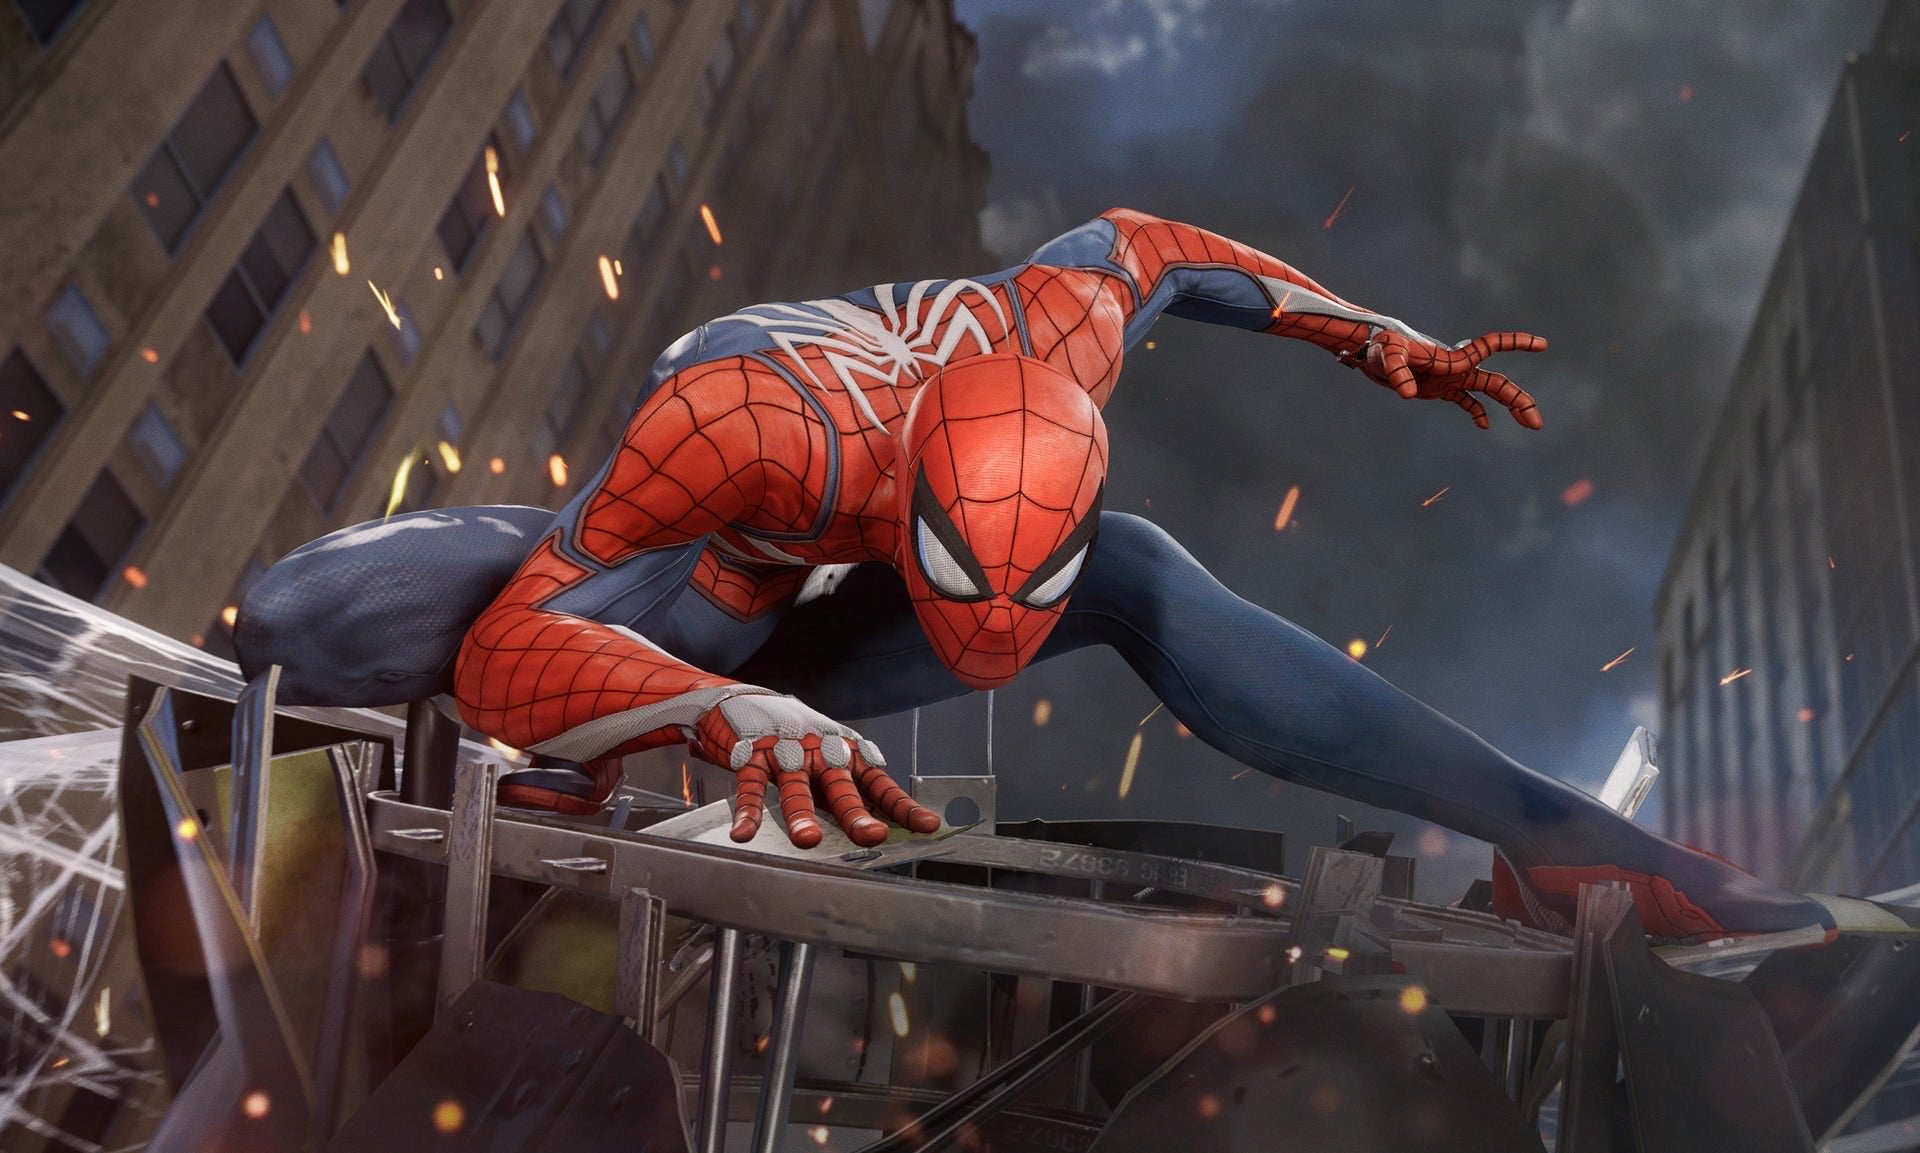 Image for Sony says Spider-Man has the power to help them reach 100 million units in console sales by bringing new people into gaming